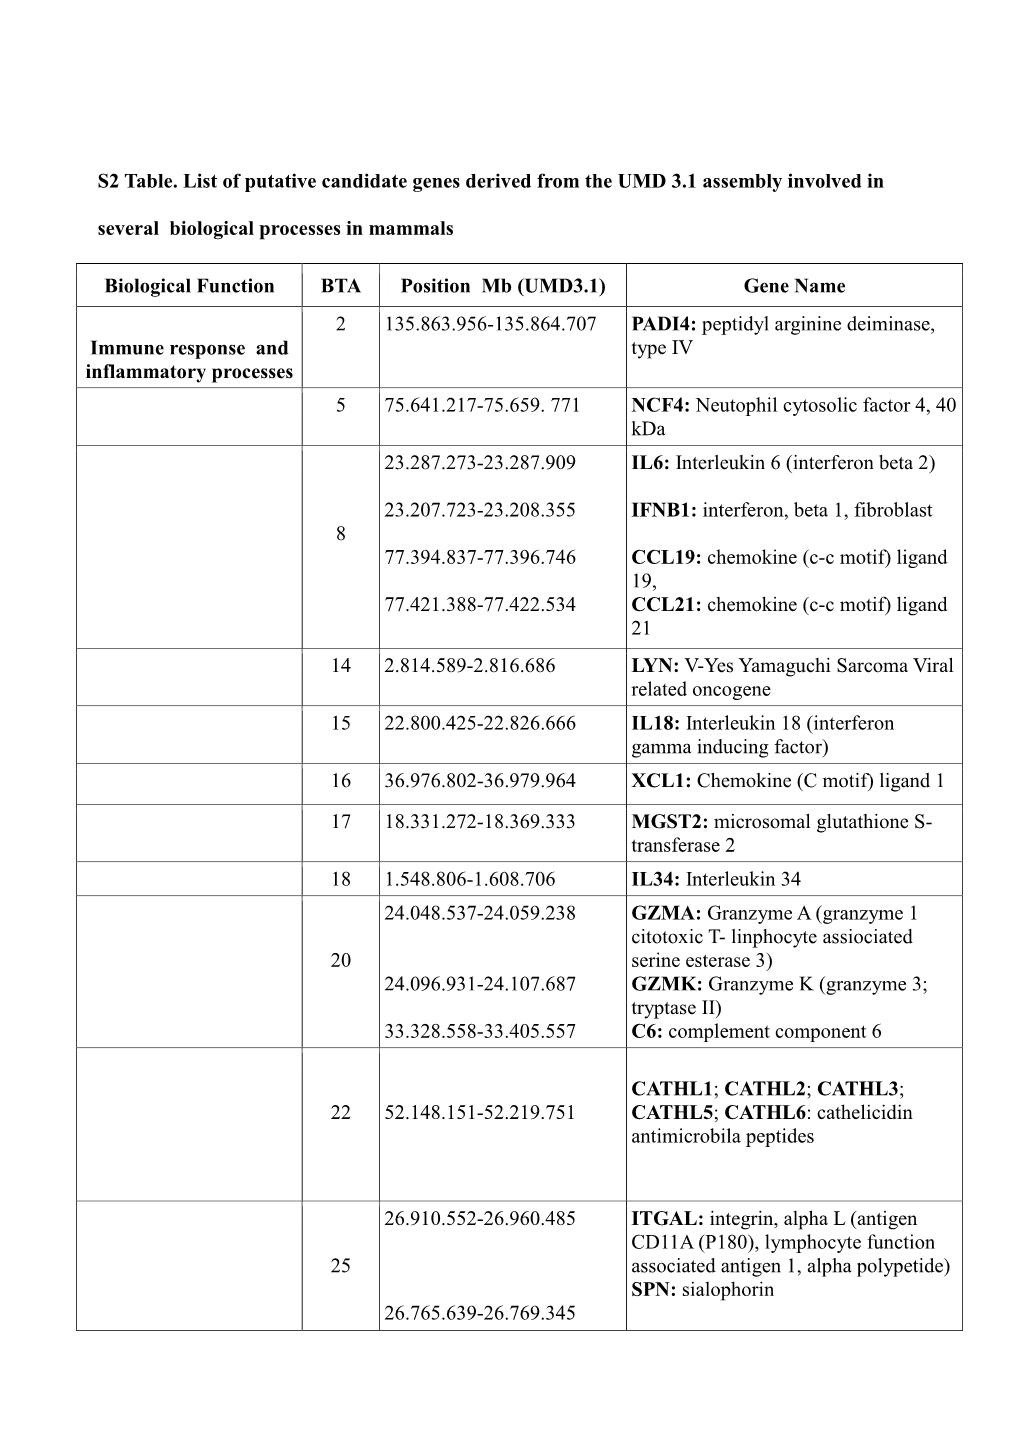 S2 Table. List of Putative Candidate Genes Derived from the UMD 3.1 Assembly Involved In